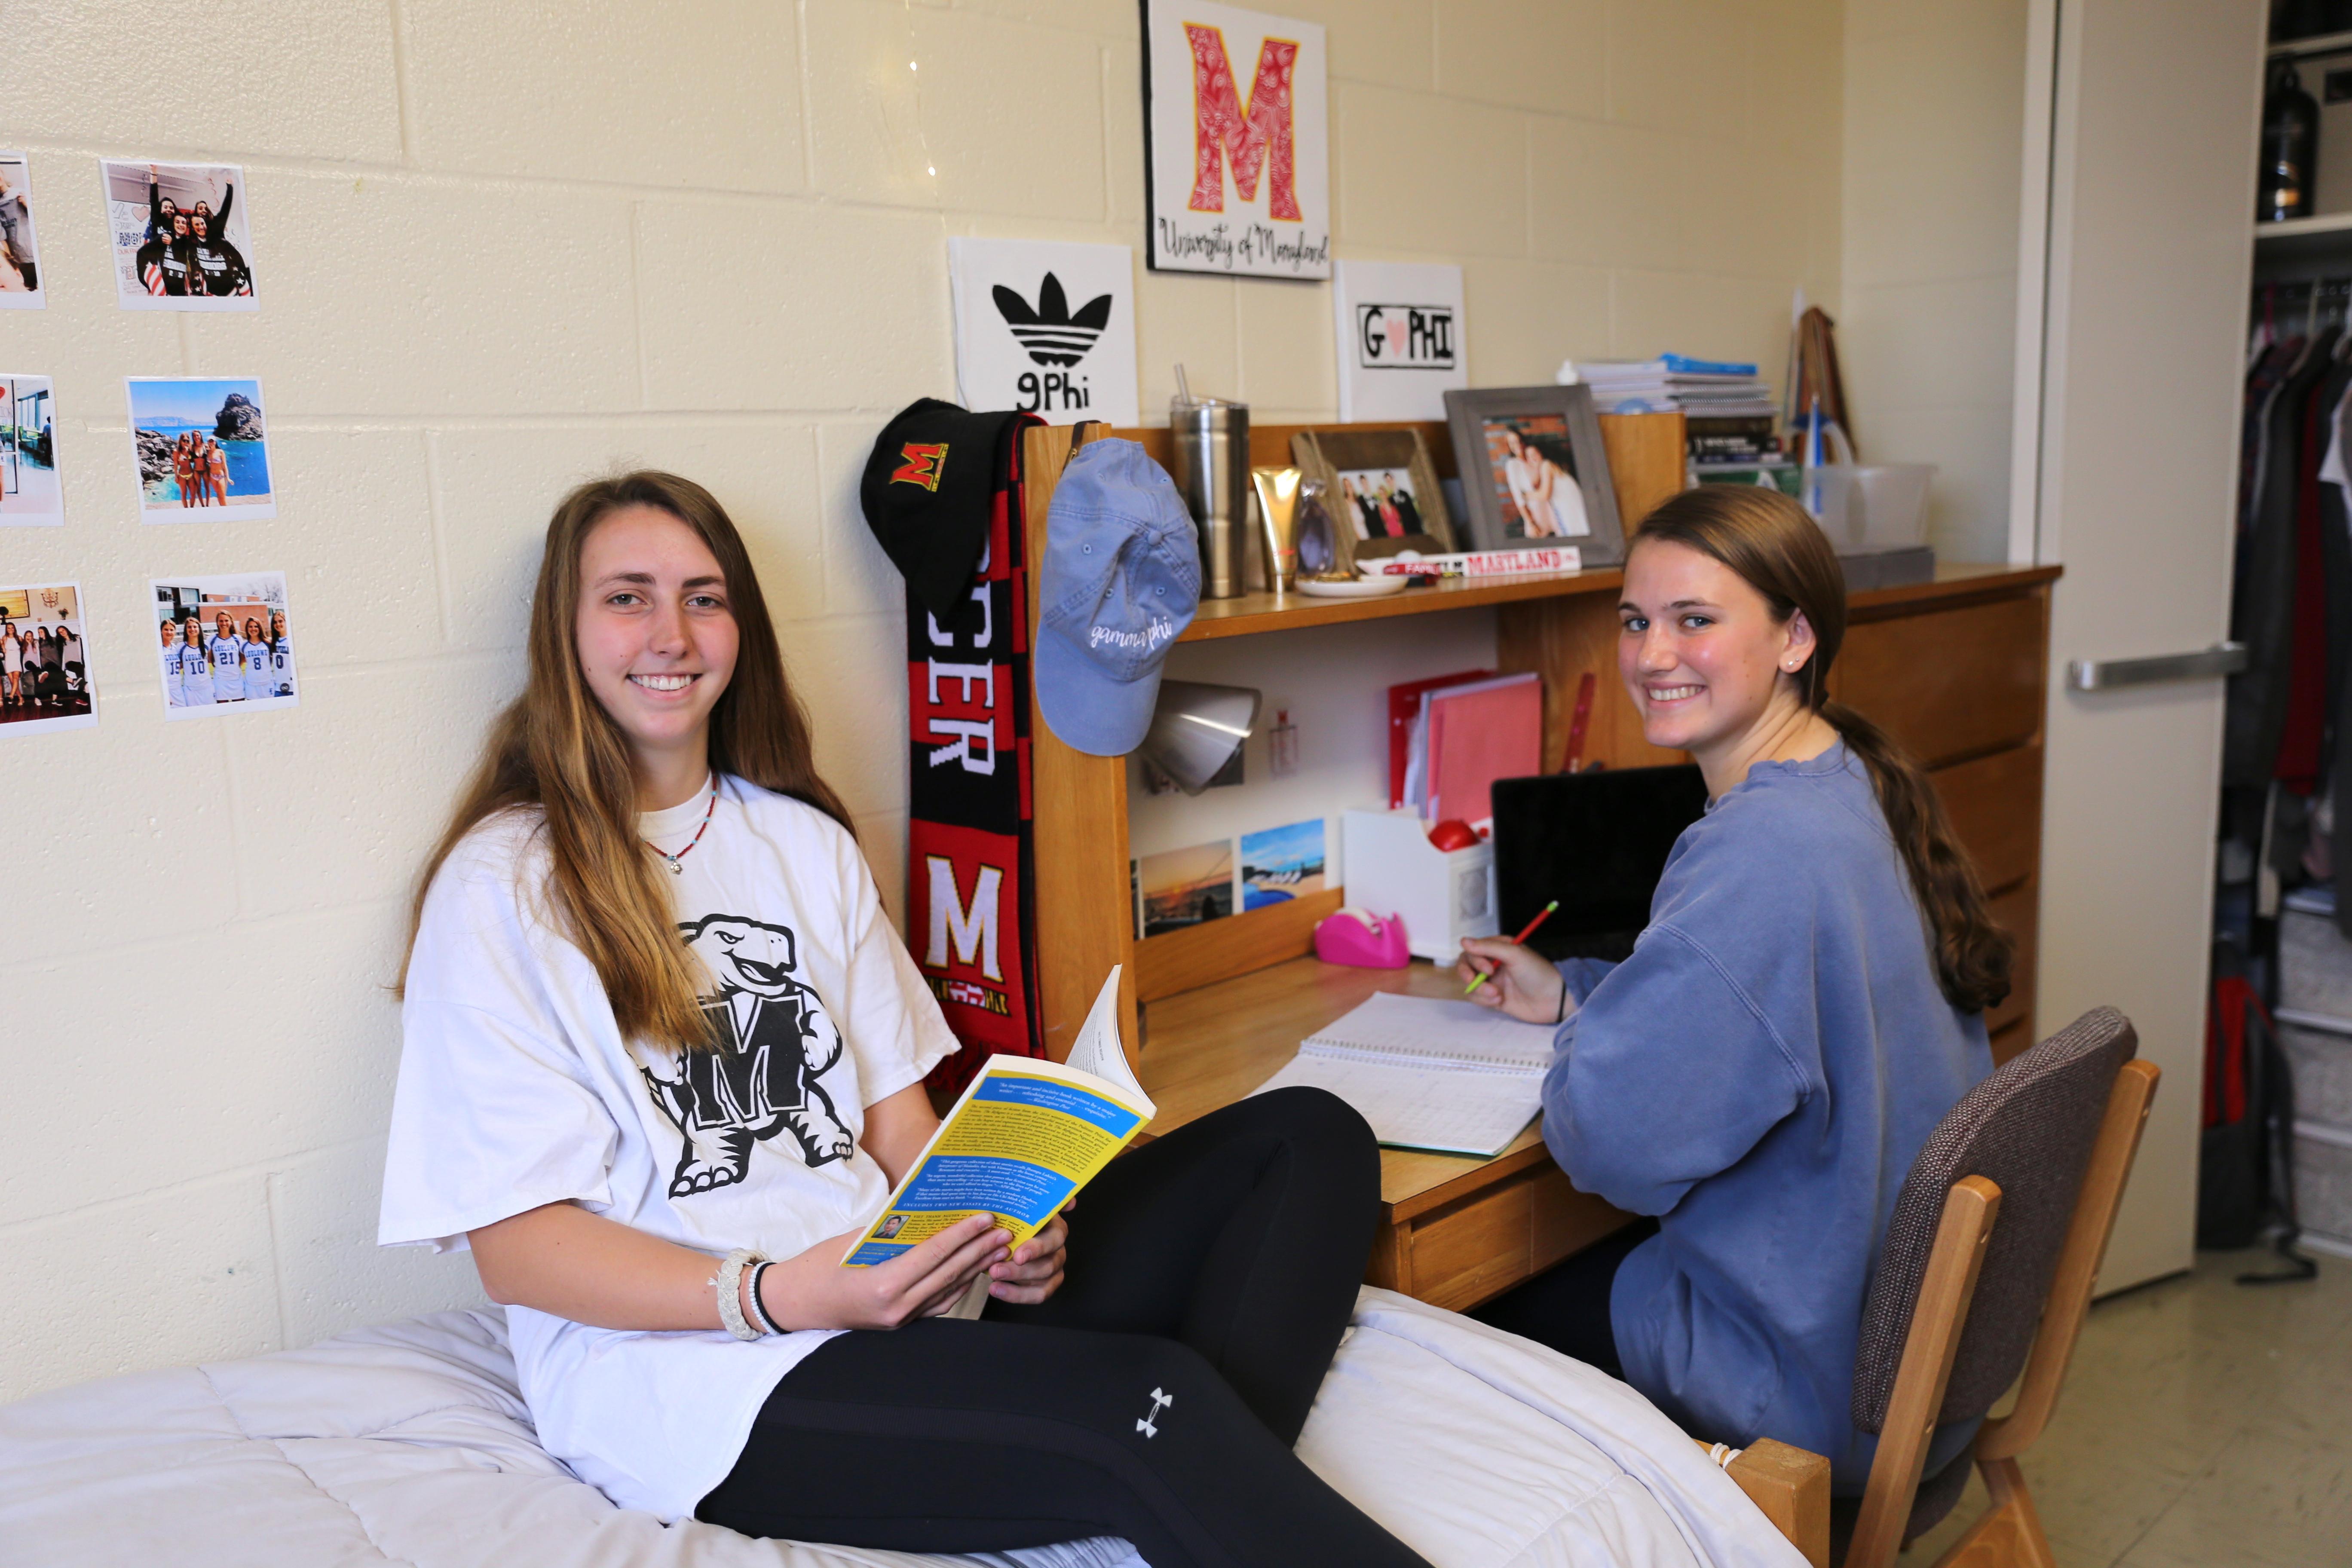 two female roommates smiling at the camera in their dorm room